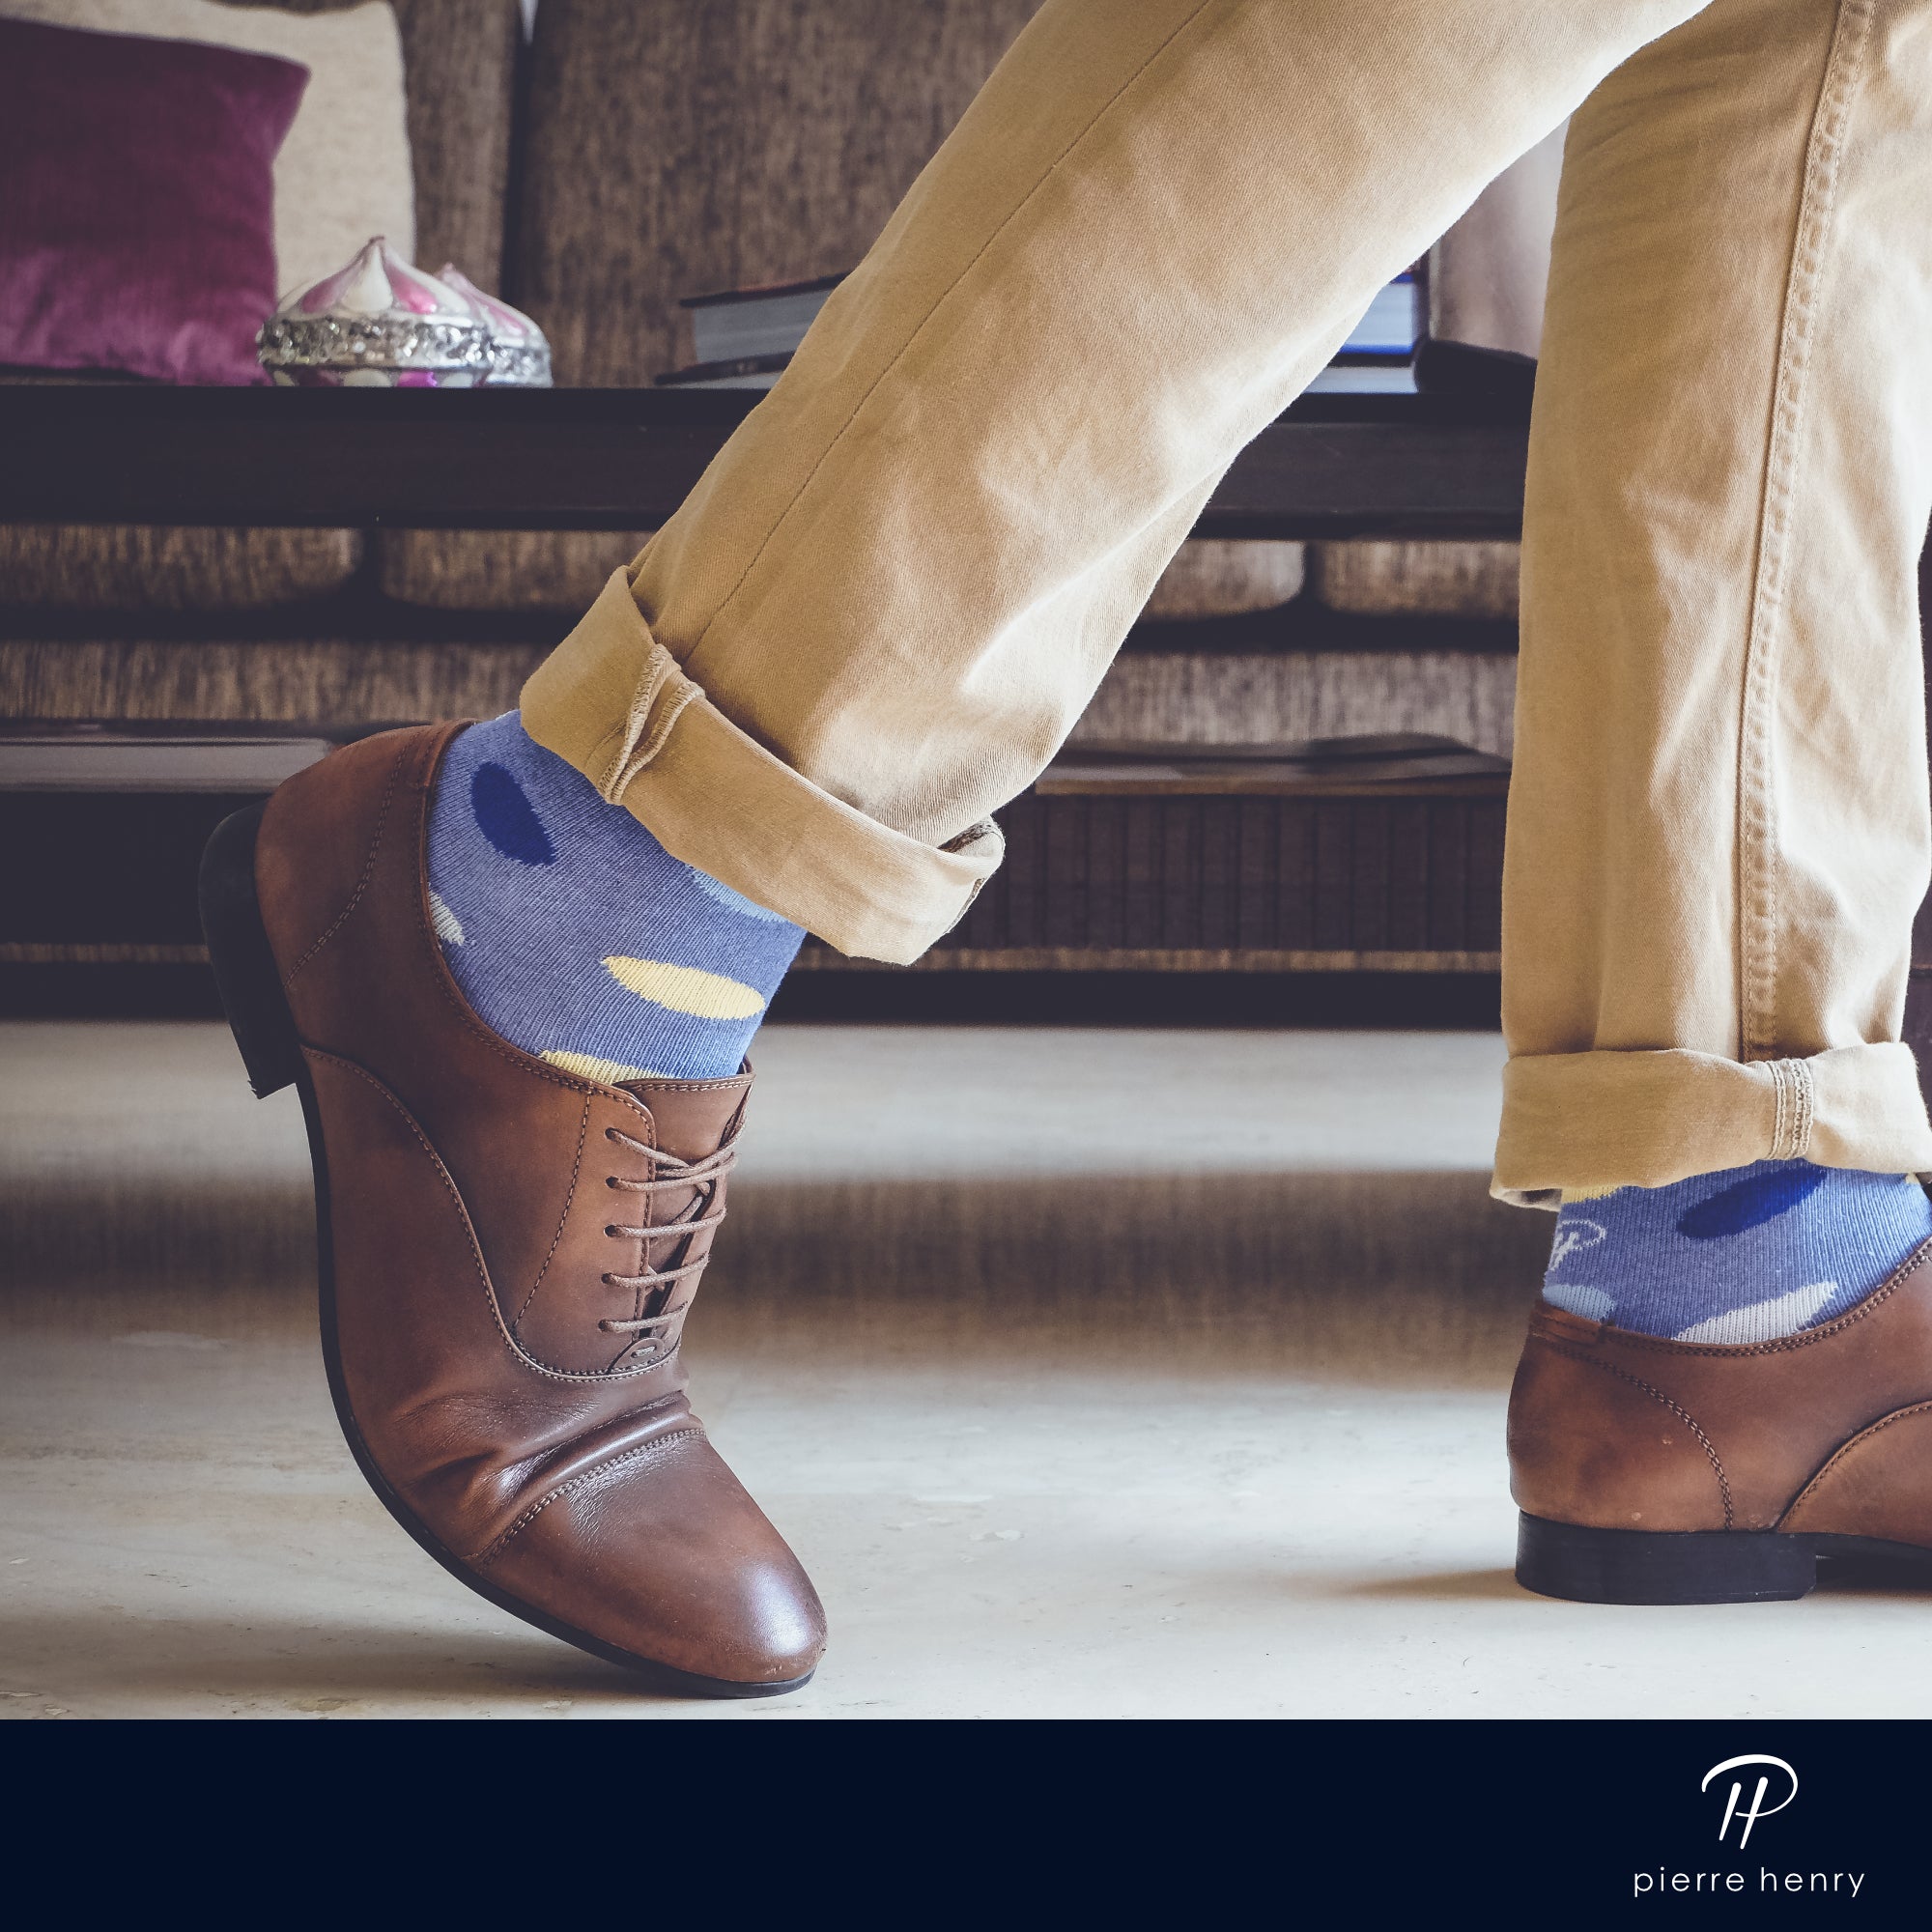 blue over the calf socks with yellow navy and light blue oval pattern, brown dress shoes, beige pants